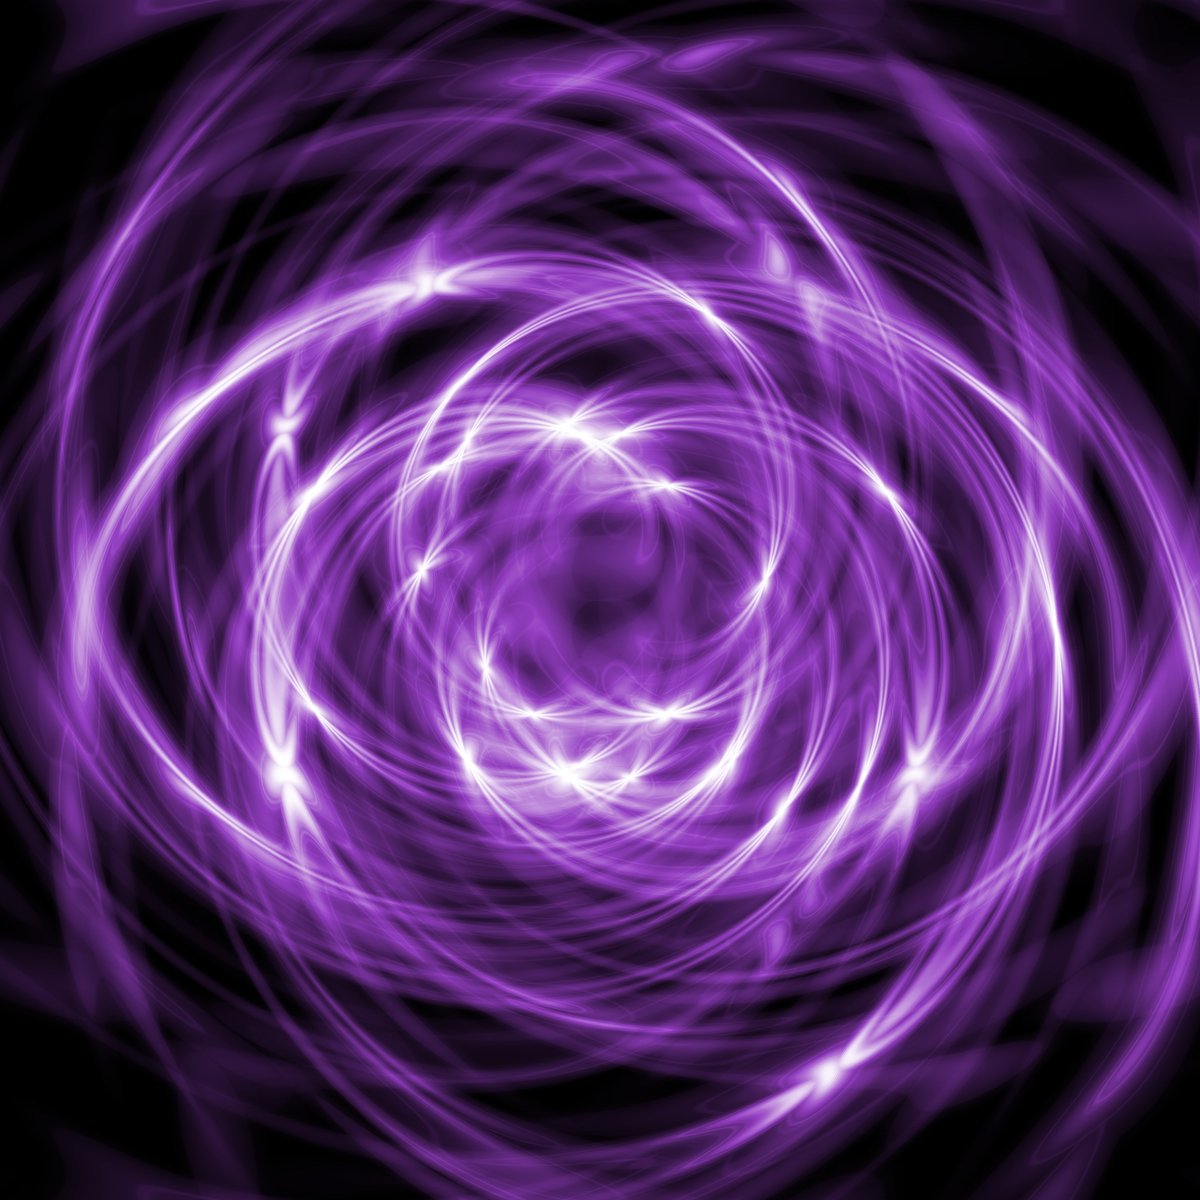 this is an amazing image of purple colored rings